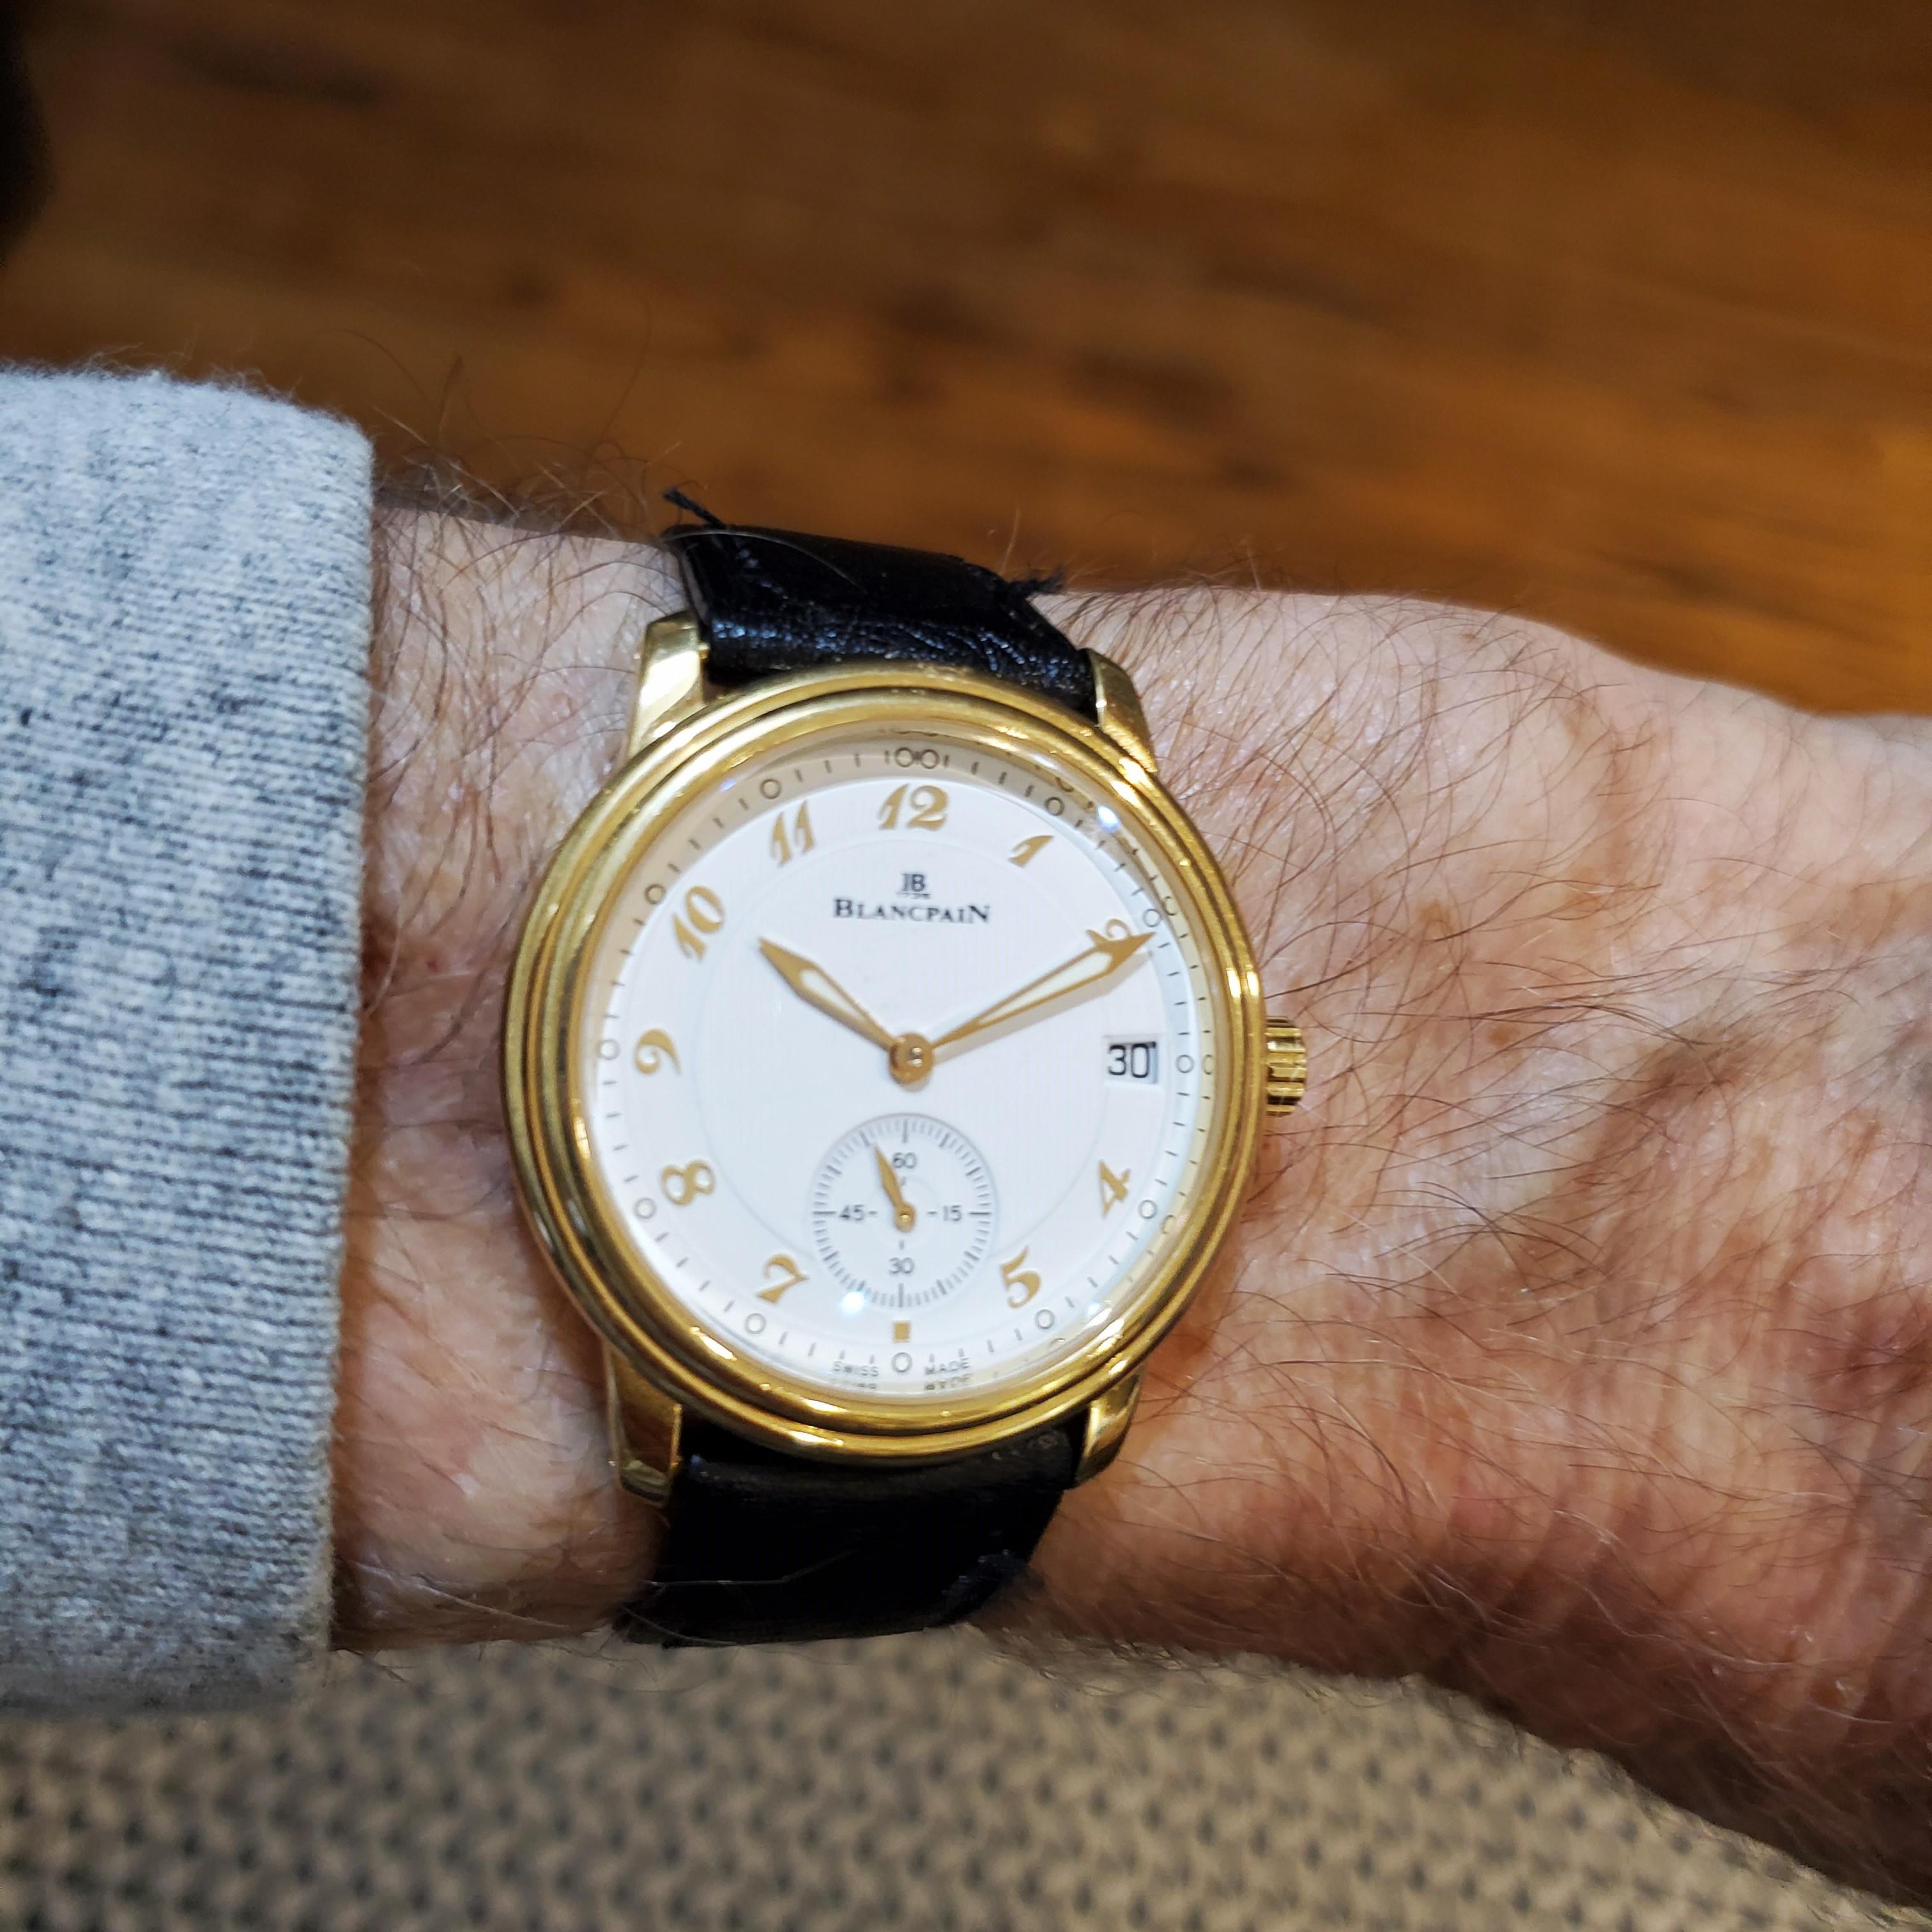 Blancpain Limited Edition Extra Slim Automatic; with Porcelain Breguet Dial.  The watch is made in a18K yellow gold case measuring 36mm with Sapphire crystal, sub second hand at 6 o'clock.  The case has a double ribbed stepped buckle. The watch